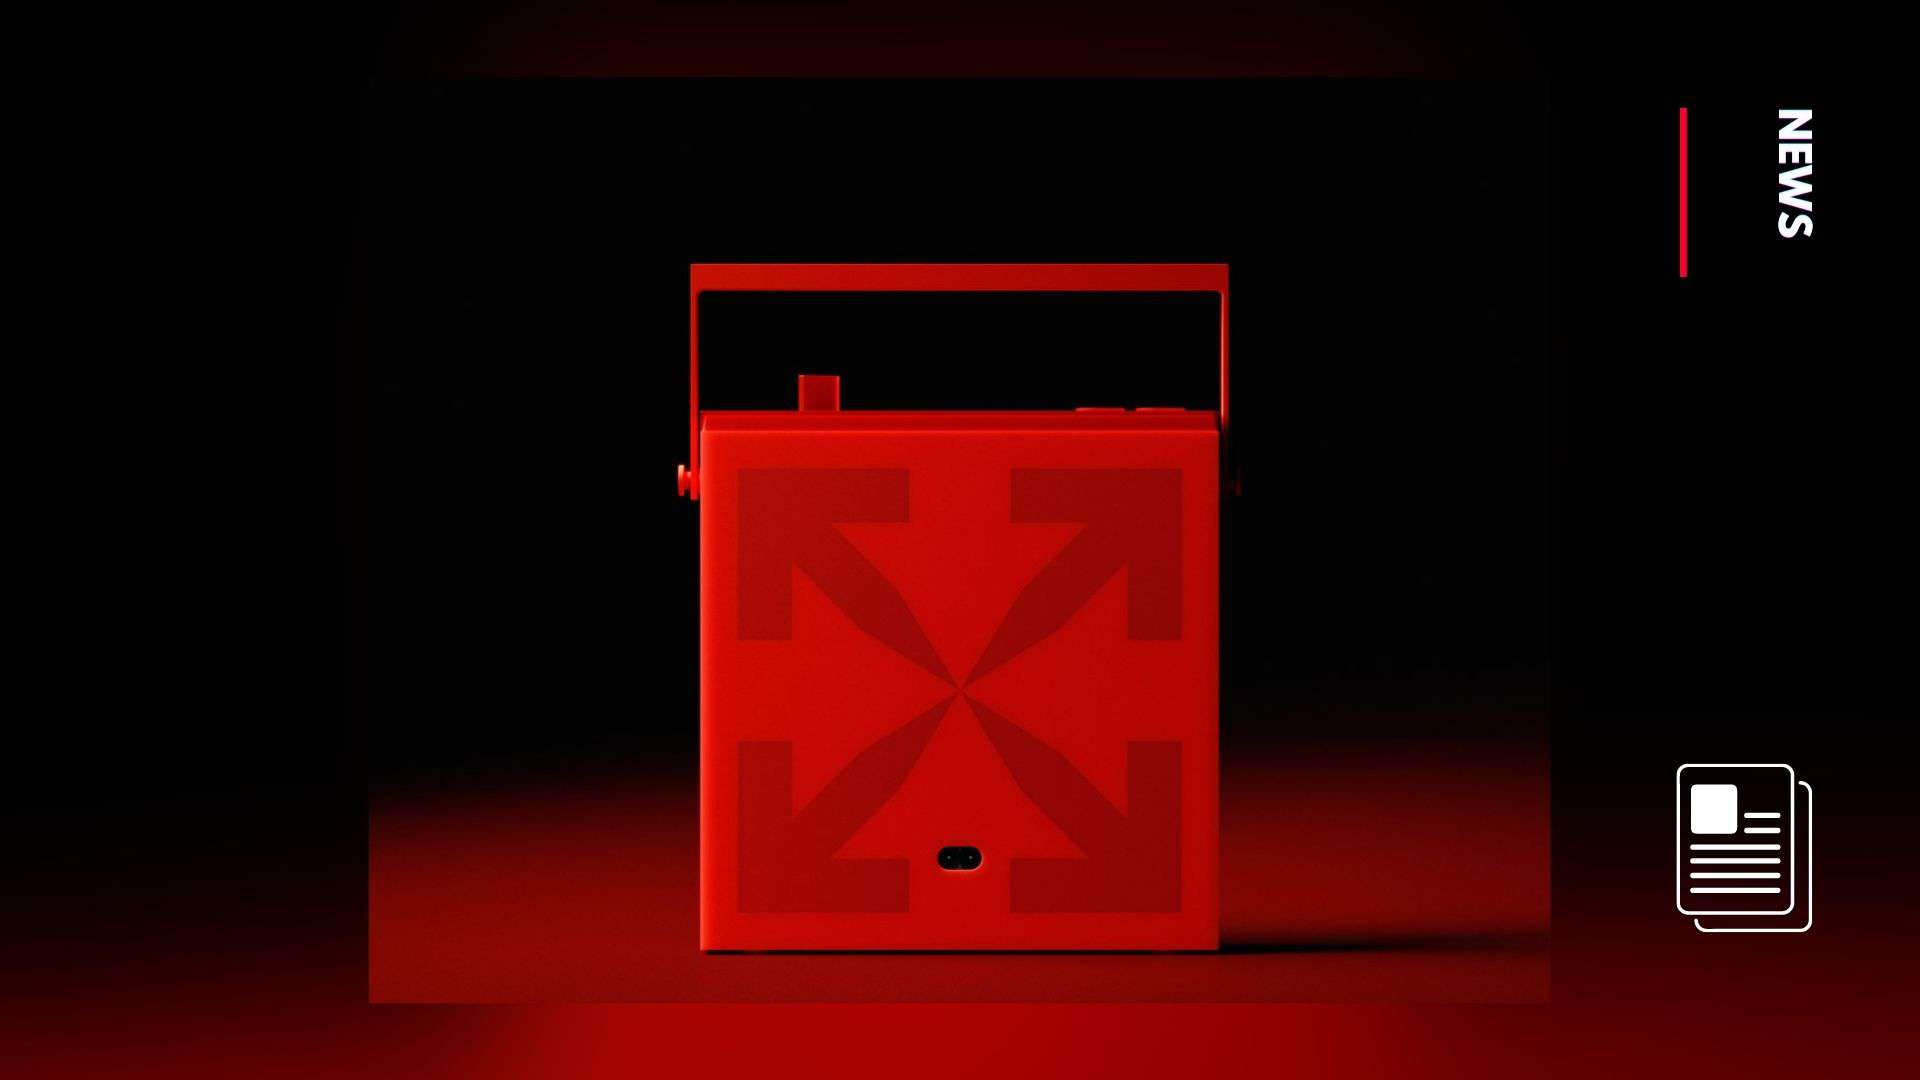 Teenage Engineering x Off-White OB-4 speaker collab pays tribute to Virgil Abloh